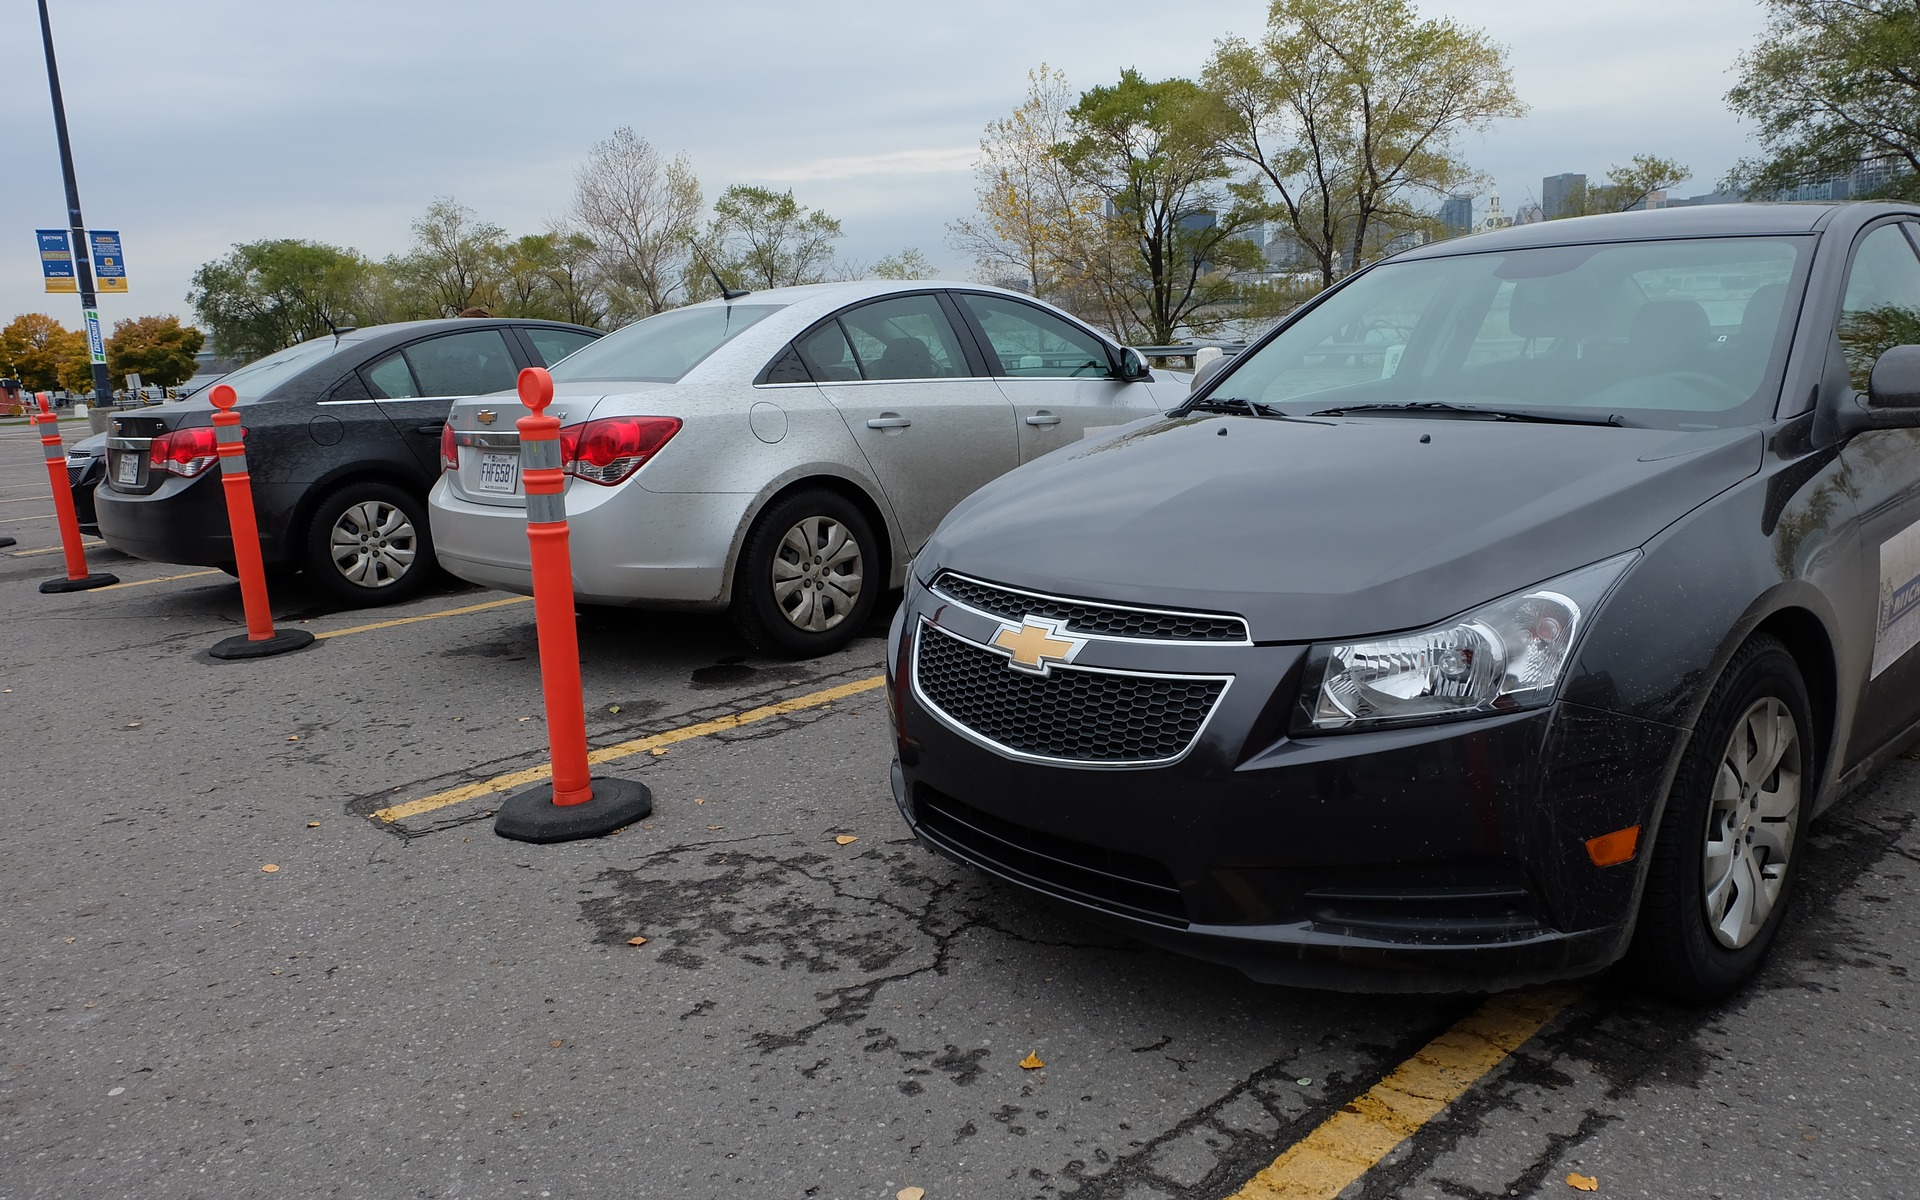 Our fleet of test vehicles for the day: some sturdy Chevrolet Cruzes. 